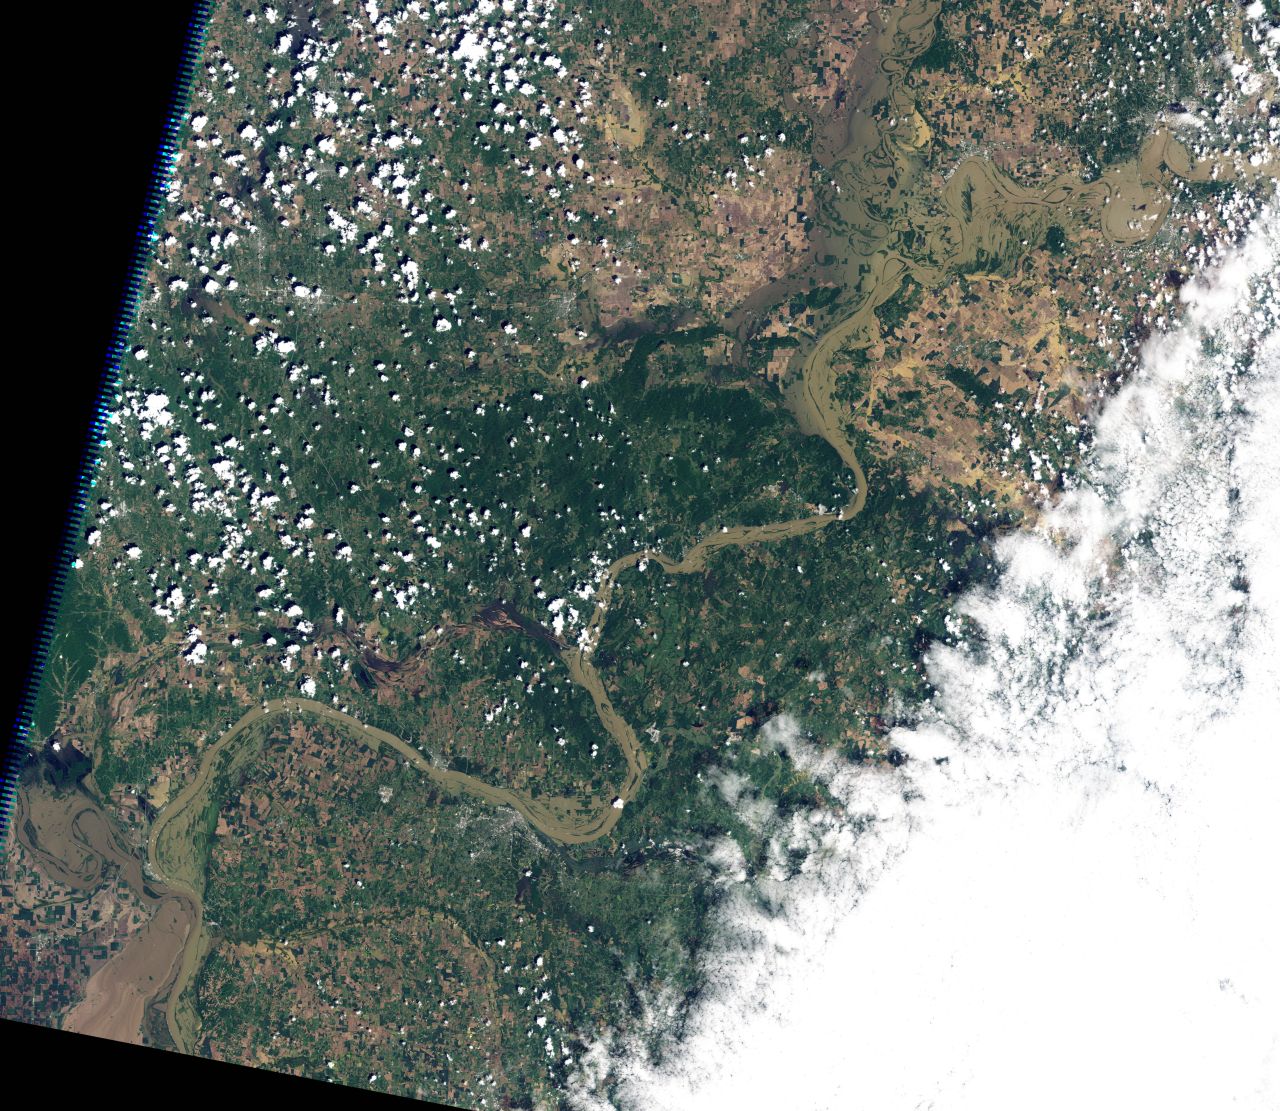 The<a href="http://edition.cnn.com/2011/US/05/21/flooding/index.html"> flooded outline</a> of the Mississippi River can be seen meandering into the left edge of this NASA image, with the Ohio River snaking north and east. Parts of the Mississippi experienced its worst floods since 1933 according to the WMO.   